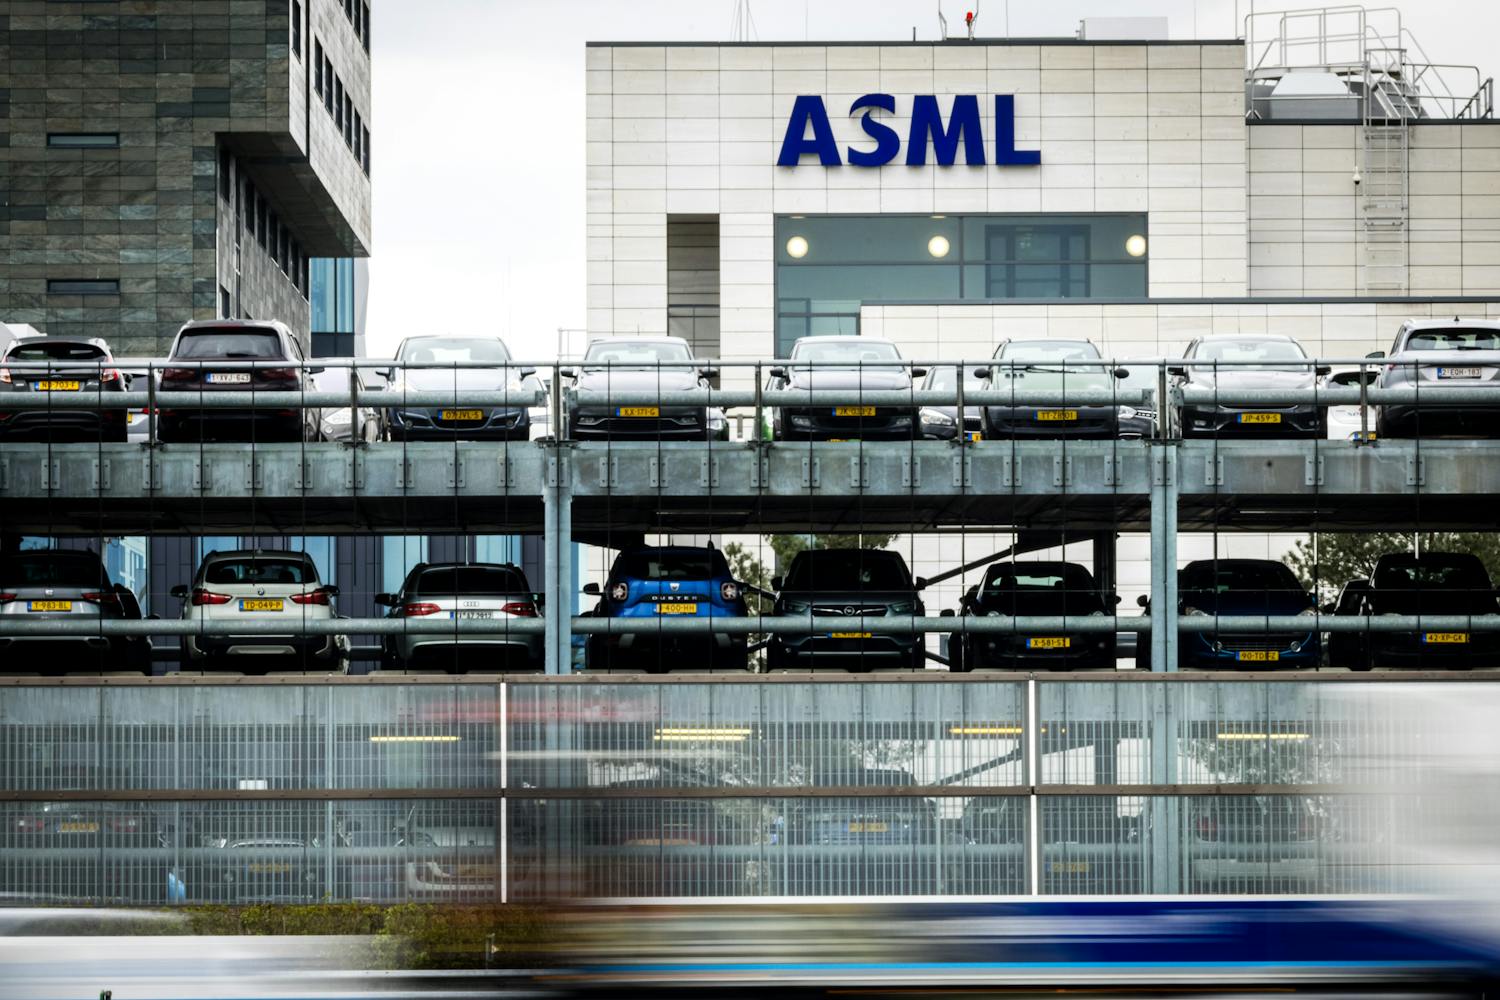 The US and Netherlands sit down to discuss Chinese export restrictions on ASML